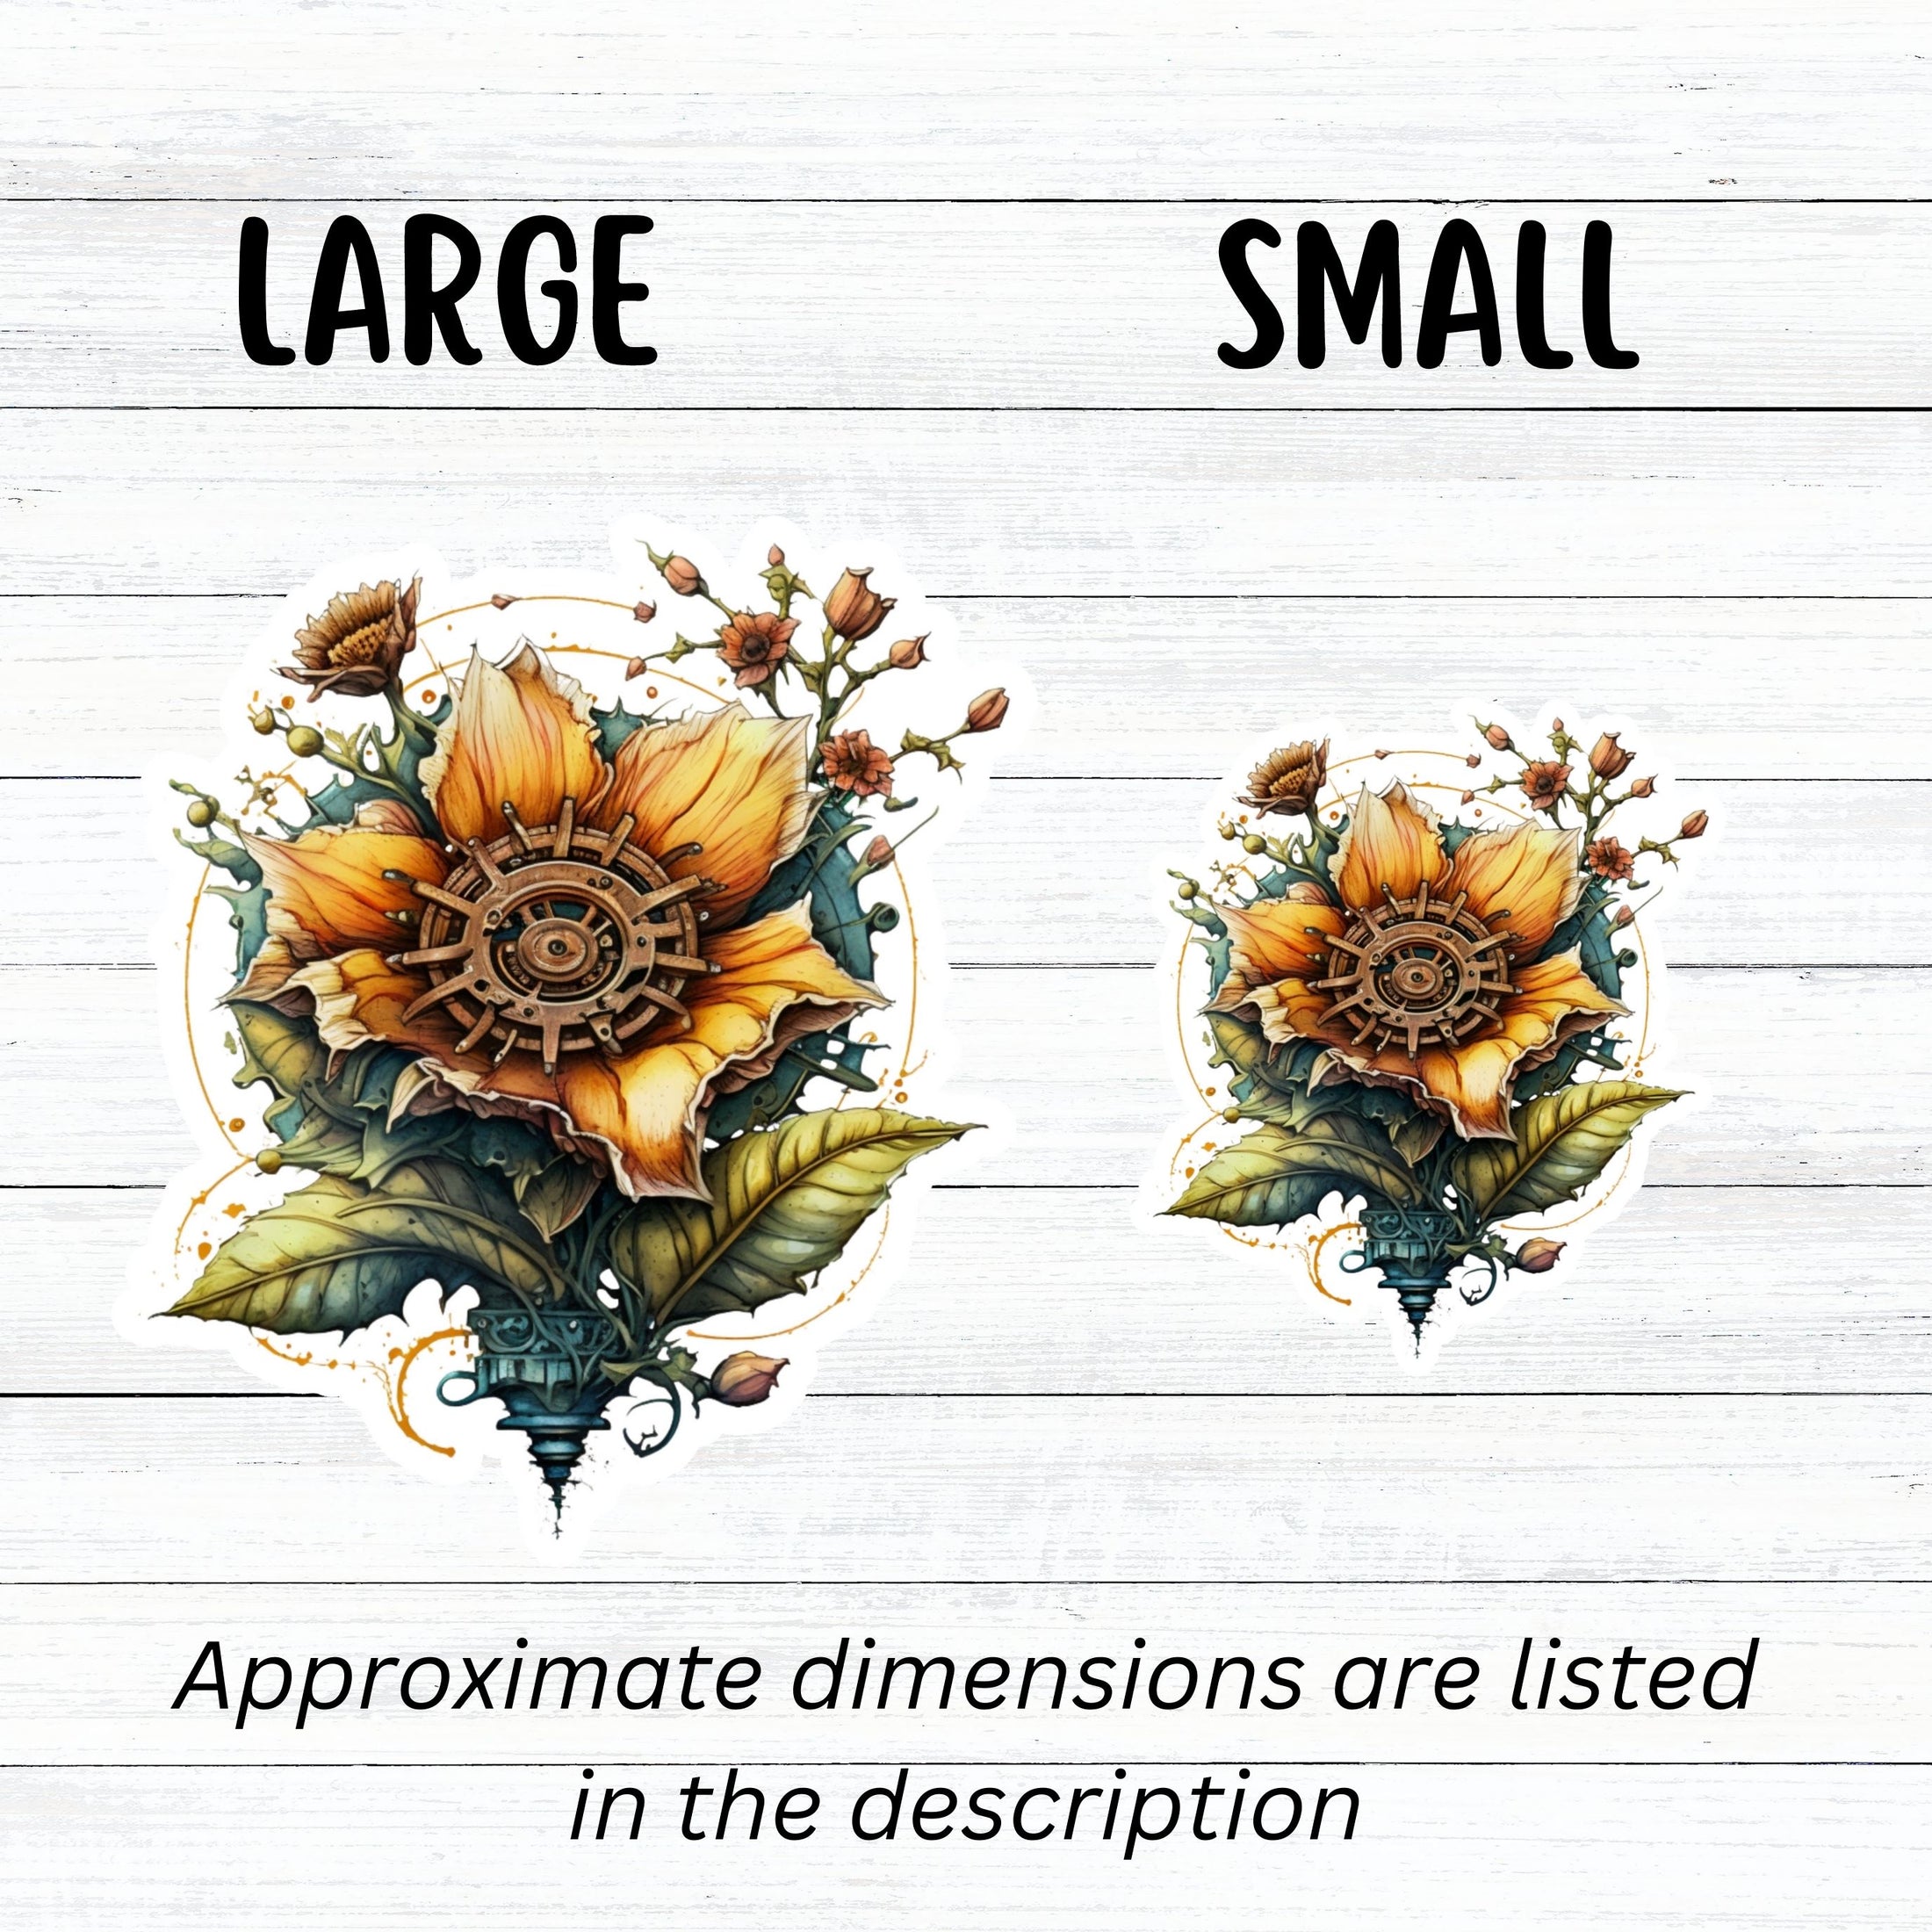 This image shows large and small steampunk sunflower stickers next to each other.